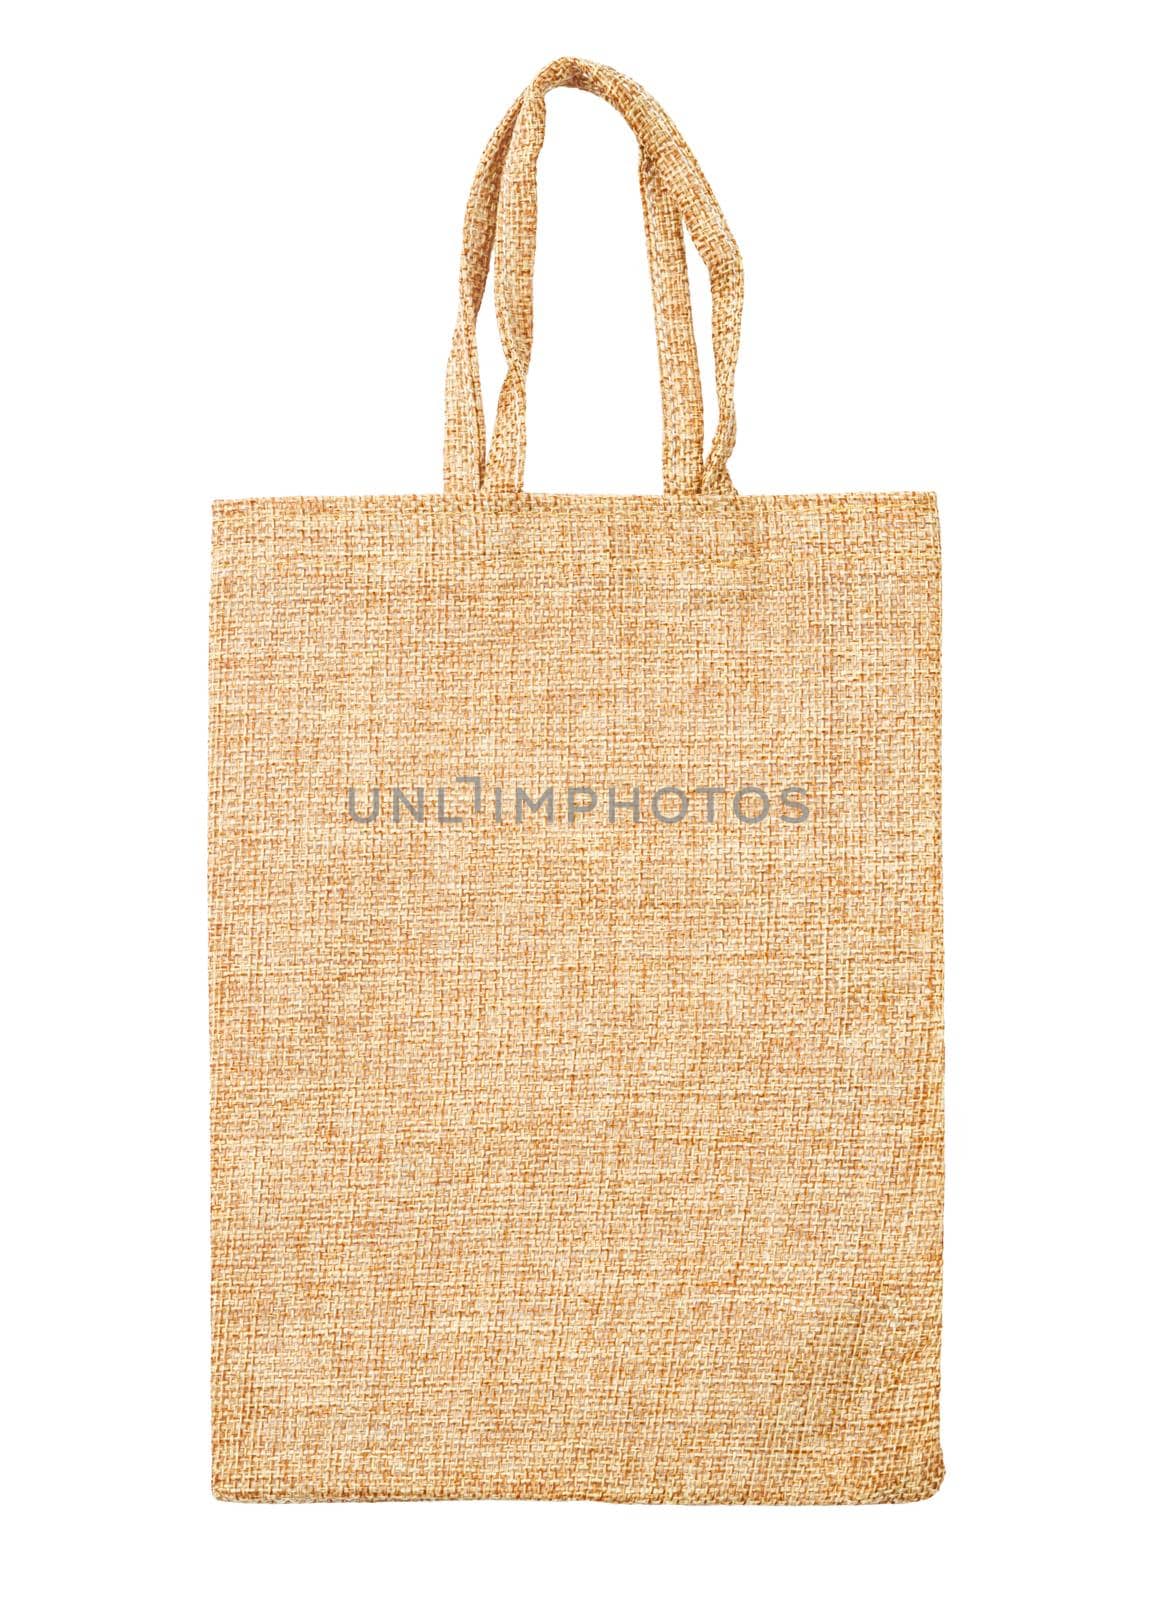 Sack bag isolated on white background with clipping path